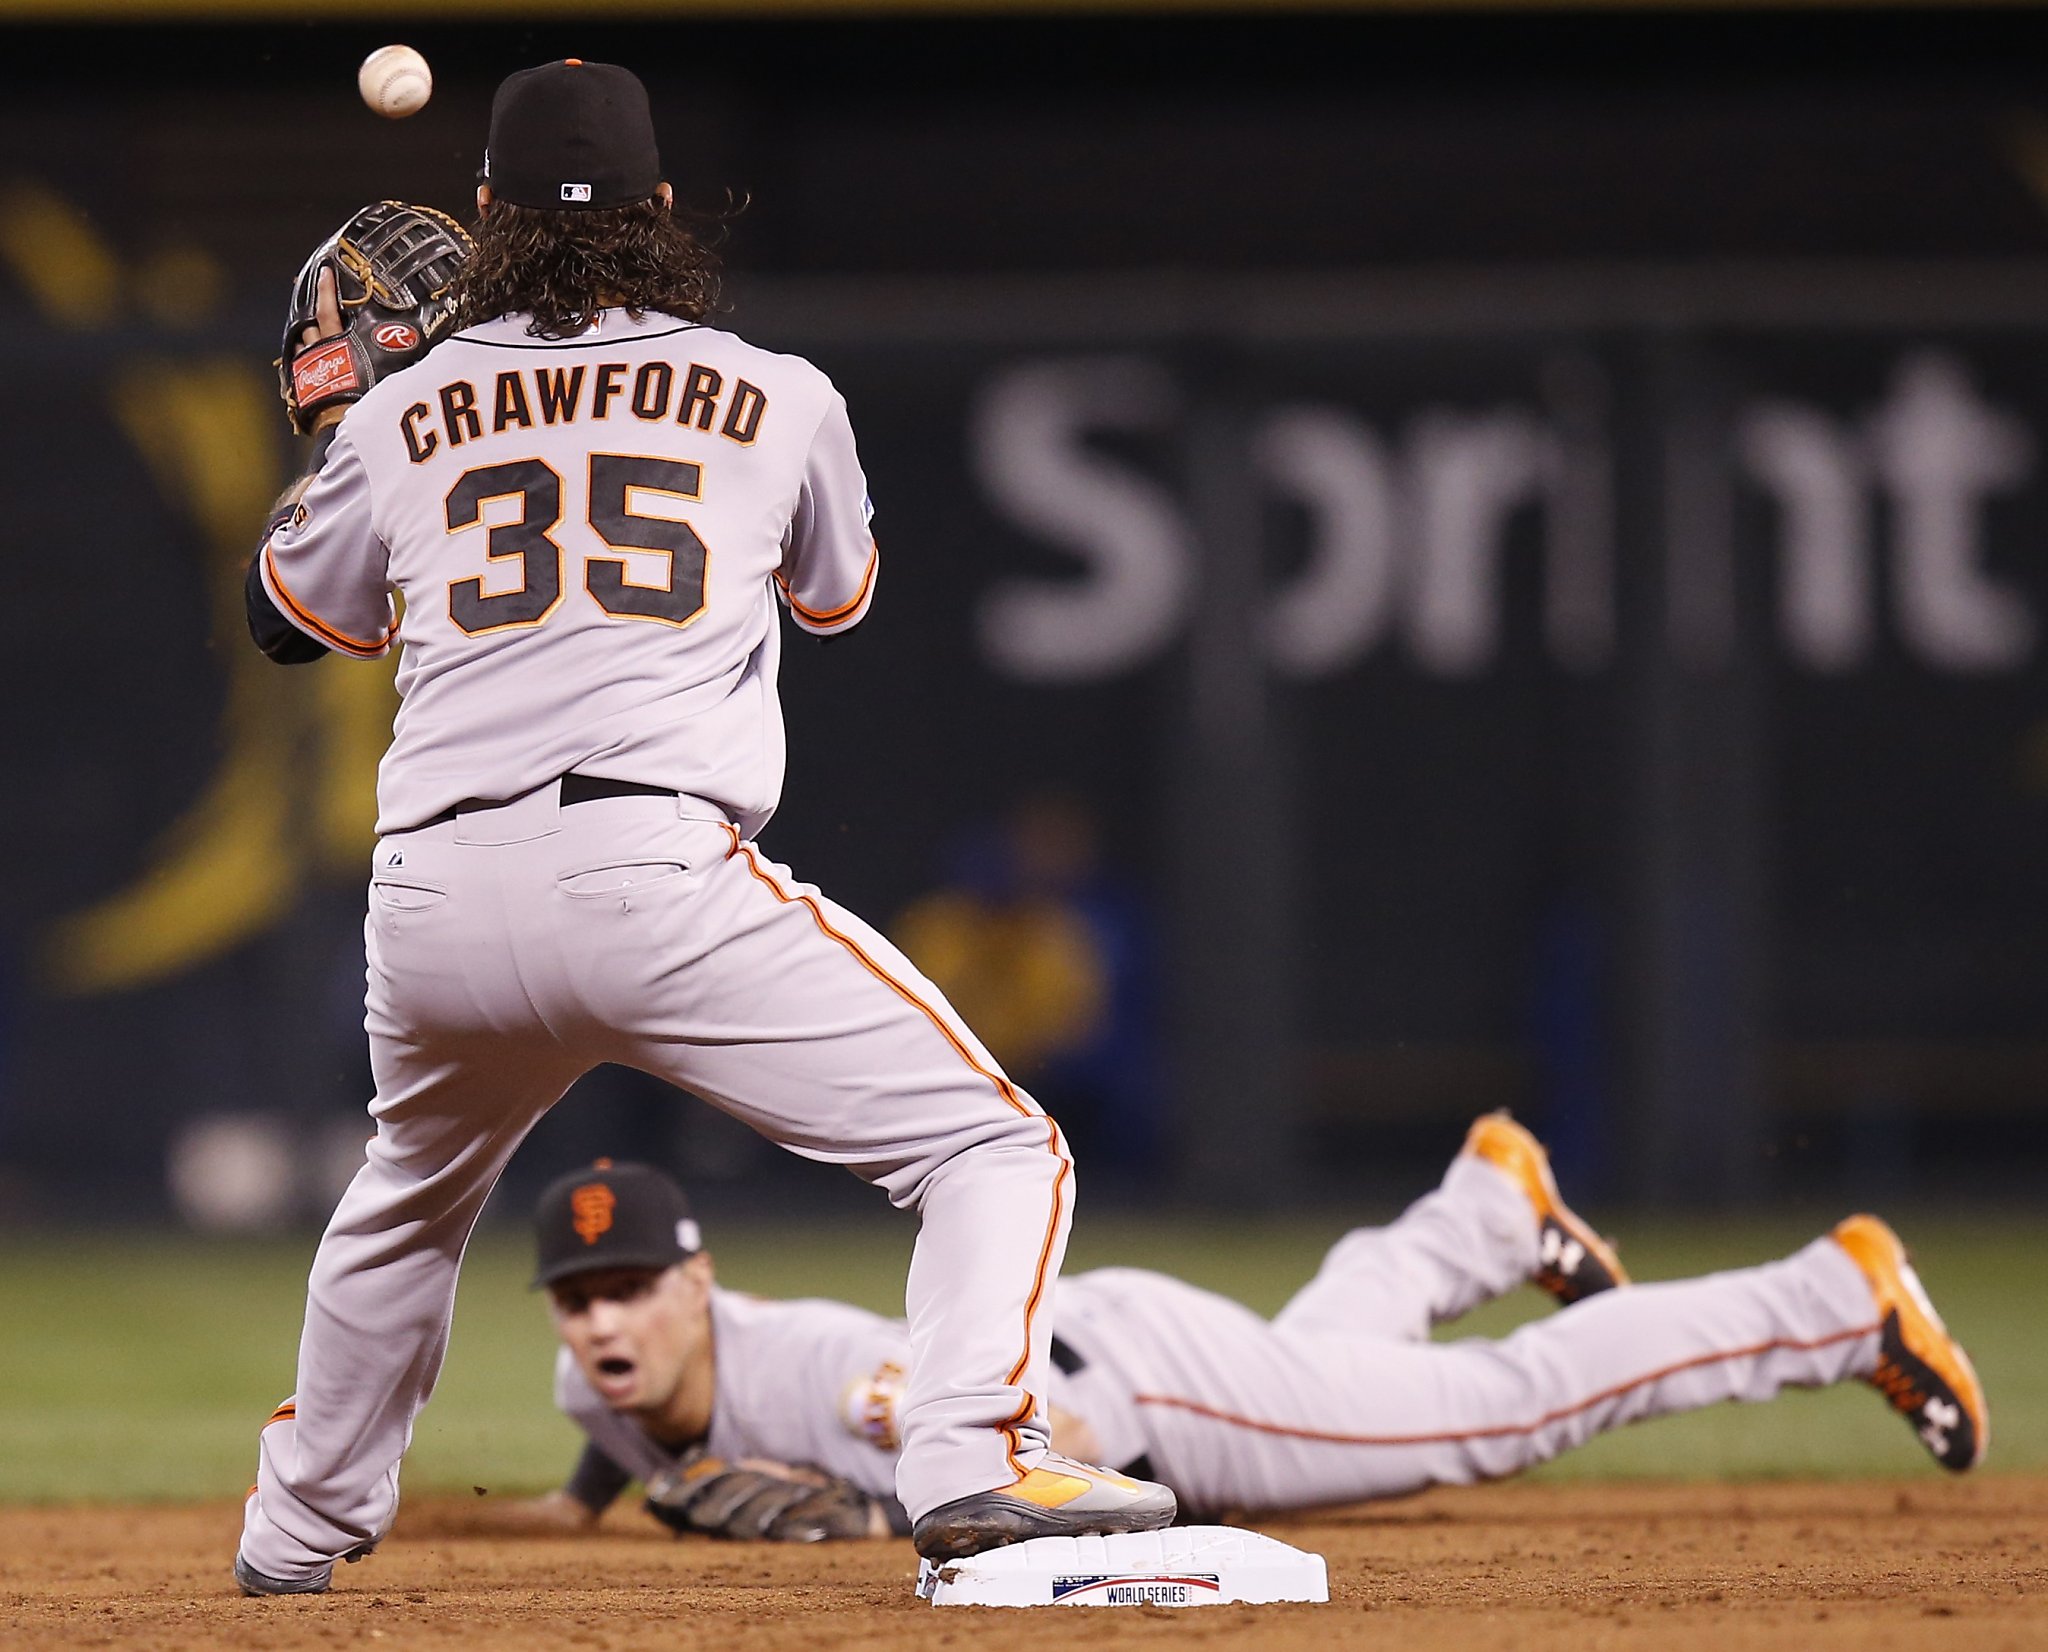 Panik doesn't panic on crucial double play